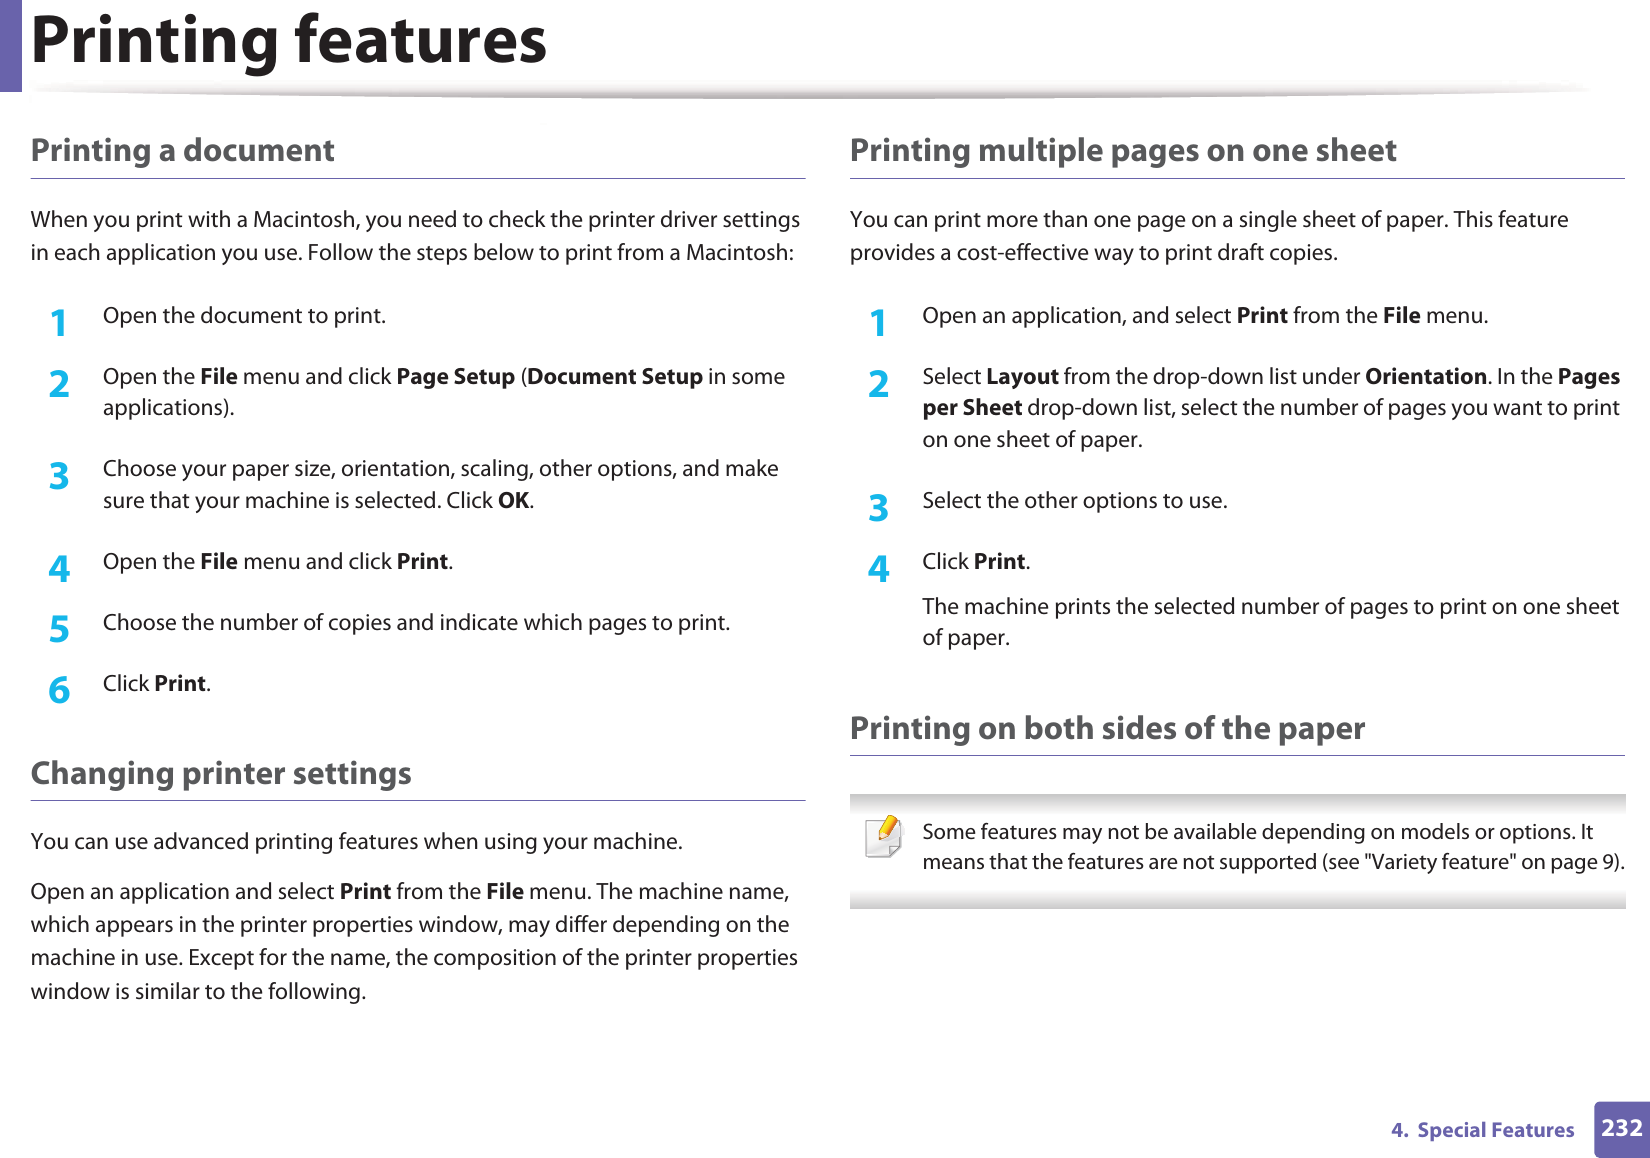 Printing features2324.  Special FeaturesPrinting a documentWhen you print with a Macintosh, you need to check the printer driver settings in each application you use. Follow the steps below to print from a Macintosh:1Open the document to print.2  Open the File menu and click Page Setup (Document Setup in some applications).3  Choose your paper size, orientation, scaling, other options, and make sure that your machine is selected. Click OK.4  Open the File menu and click Print. 5  Choose the number of copies and indicate which pages to print. 6  Click Print.Changing printer settingsYou can use advanced printing features when using your machine.Open an application and select Print from the File menu. The machine name, which appears in the printer properties window, may differ depending on the machine in use. Except for the name, the composition of the printer properties window is similar to the following.Printing multiple pages on one sheet You can print more than one page on a single sheet of paper. This feature provides a cost-effective way to print draft copies.1Open an application, and select Print from the File menu.2  Select Layout from the drop-down list under Orientation. In the Pages per Sheet drop-down list, select the number of pages you want to print on one sheet of paper.3  Select the other options to use.4  Click Print. The machine prints the selected number of pages to print on one sheet of paper.Printing on both sides of the paper Some features may not be available depending on models or options. It means that the features are not supported (see &quot;Variety feature&quot; on page 9). 